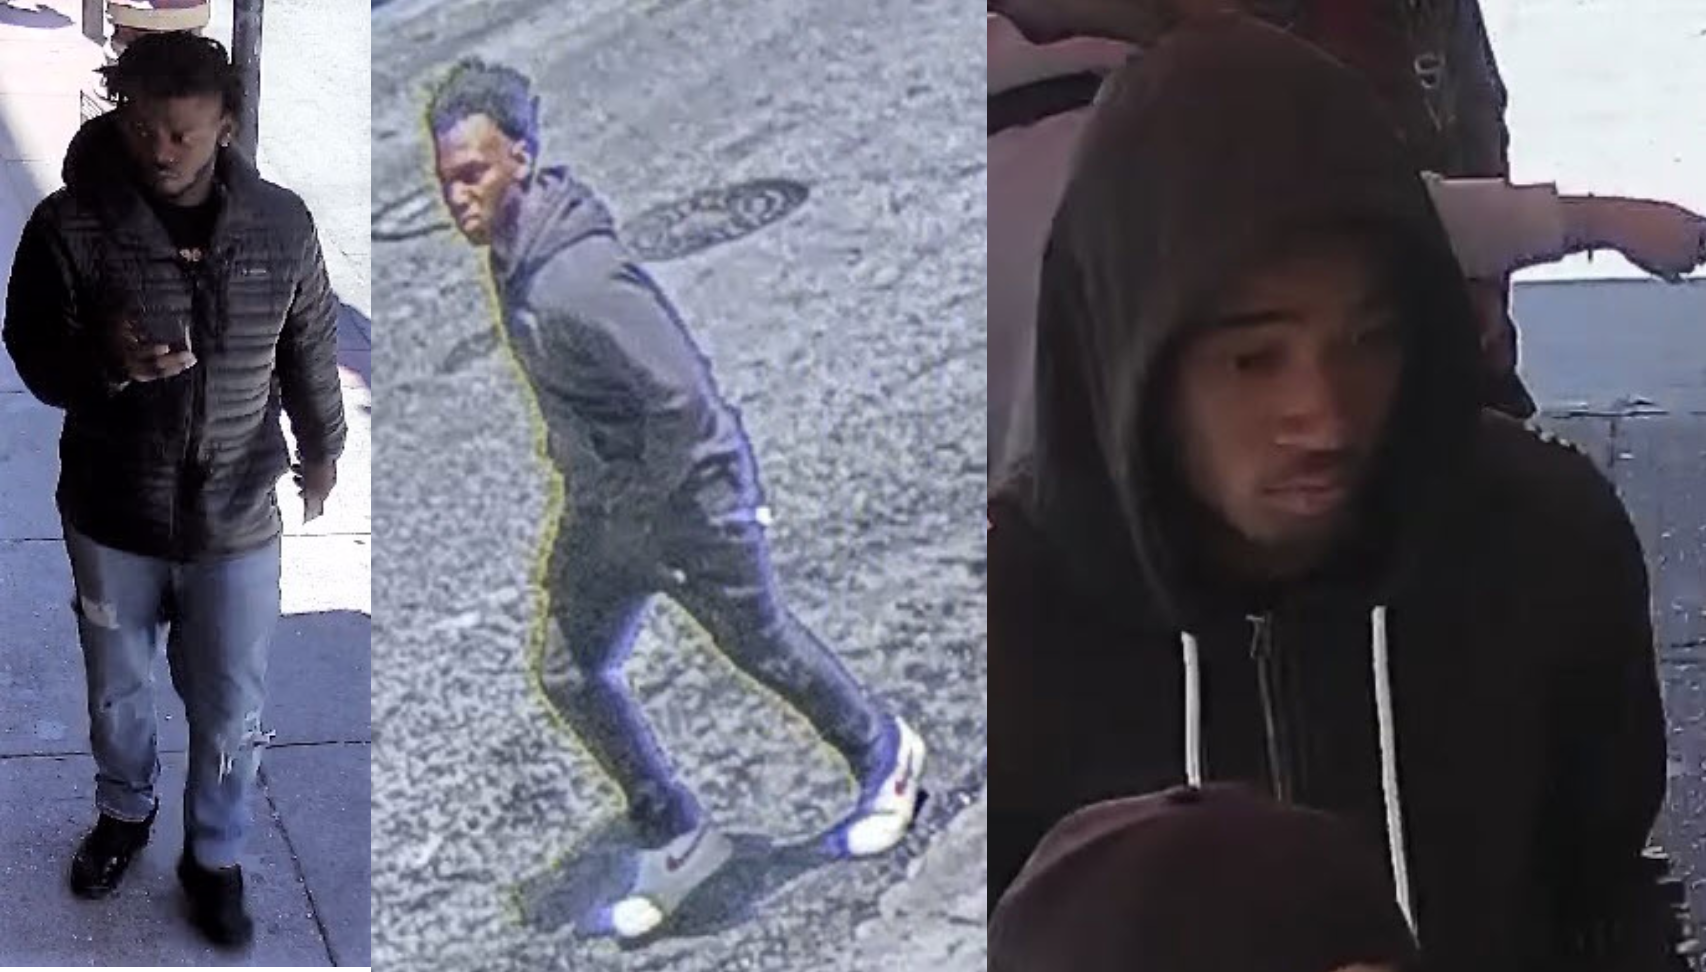 sfpd-news-release-19-094-photo-of-3-suspects